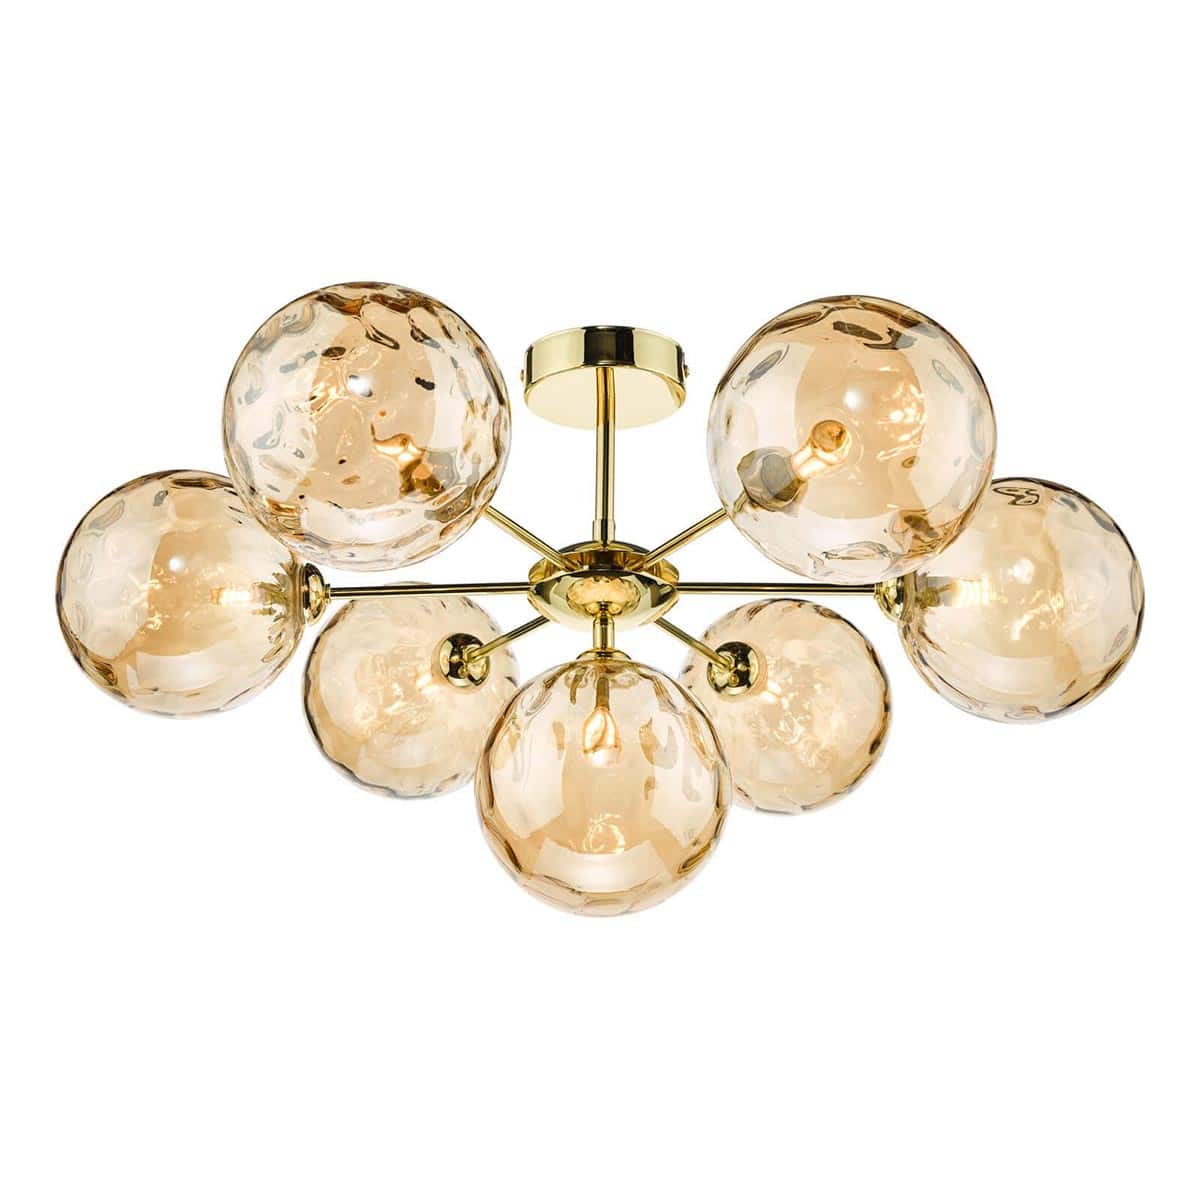 Dar Cohen 7 Arm Low Ceiling Light Gold Dimpled Champagne Glass